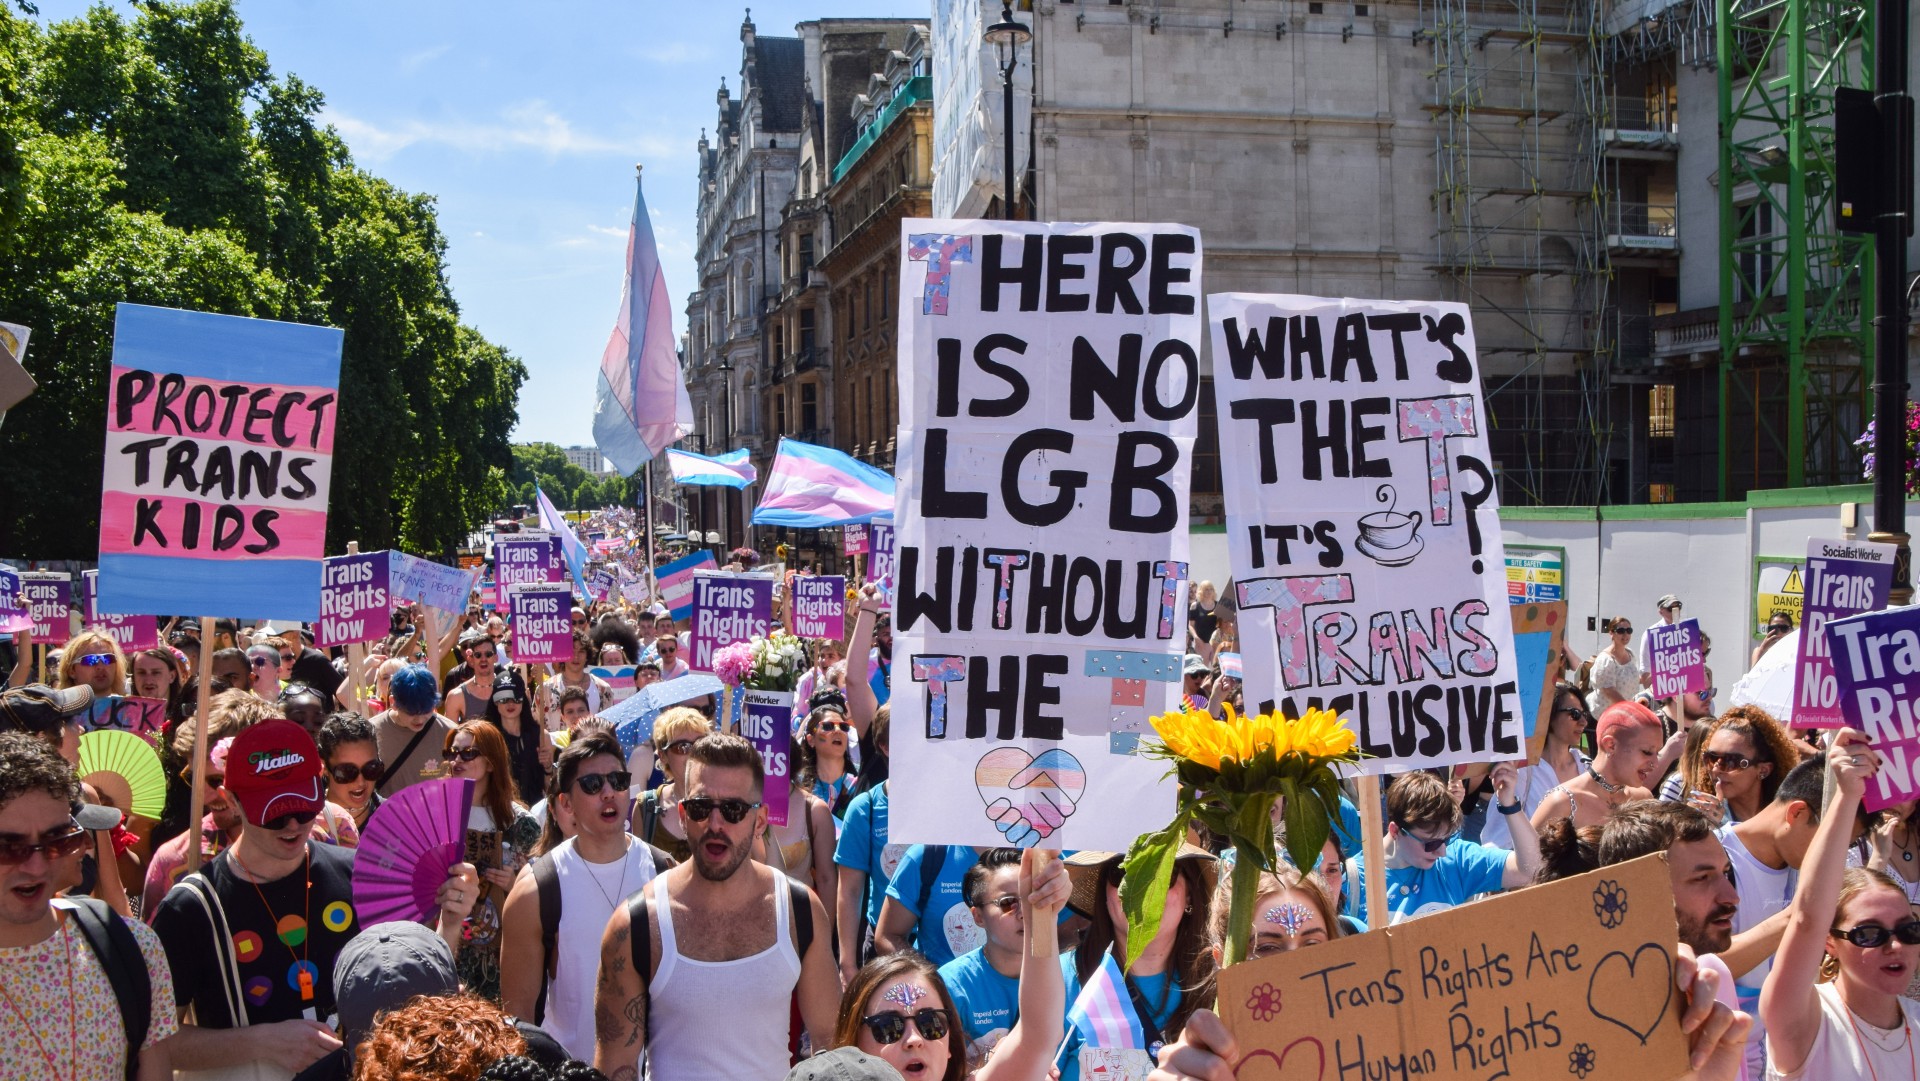 Protesters march through London in support of trans rights 